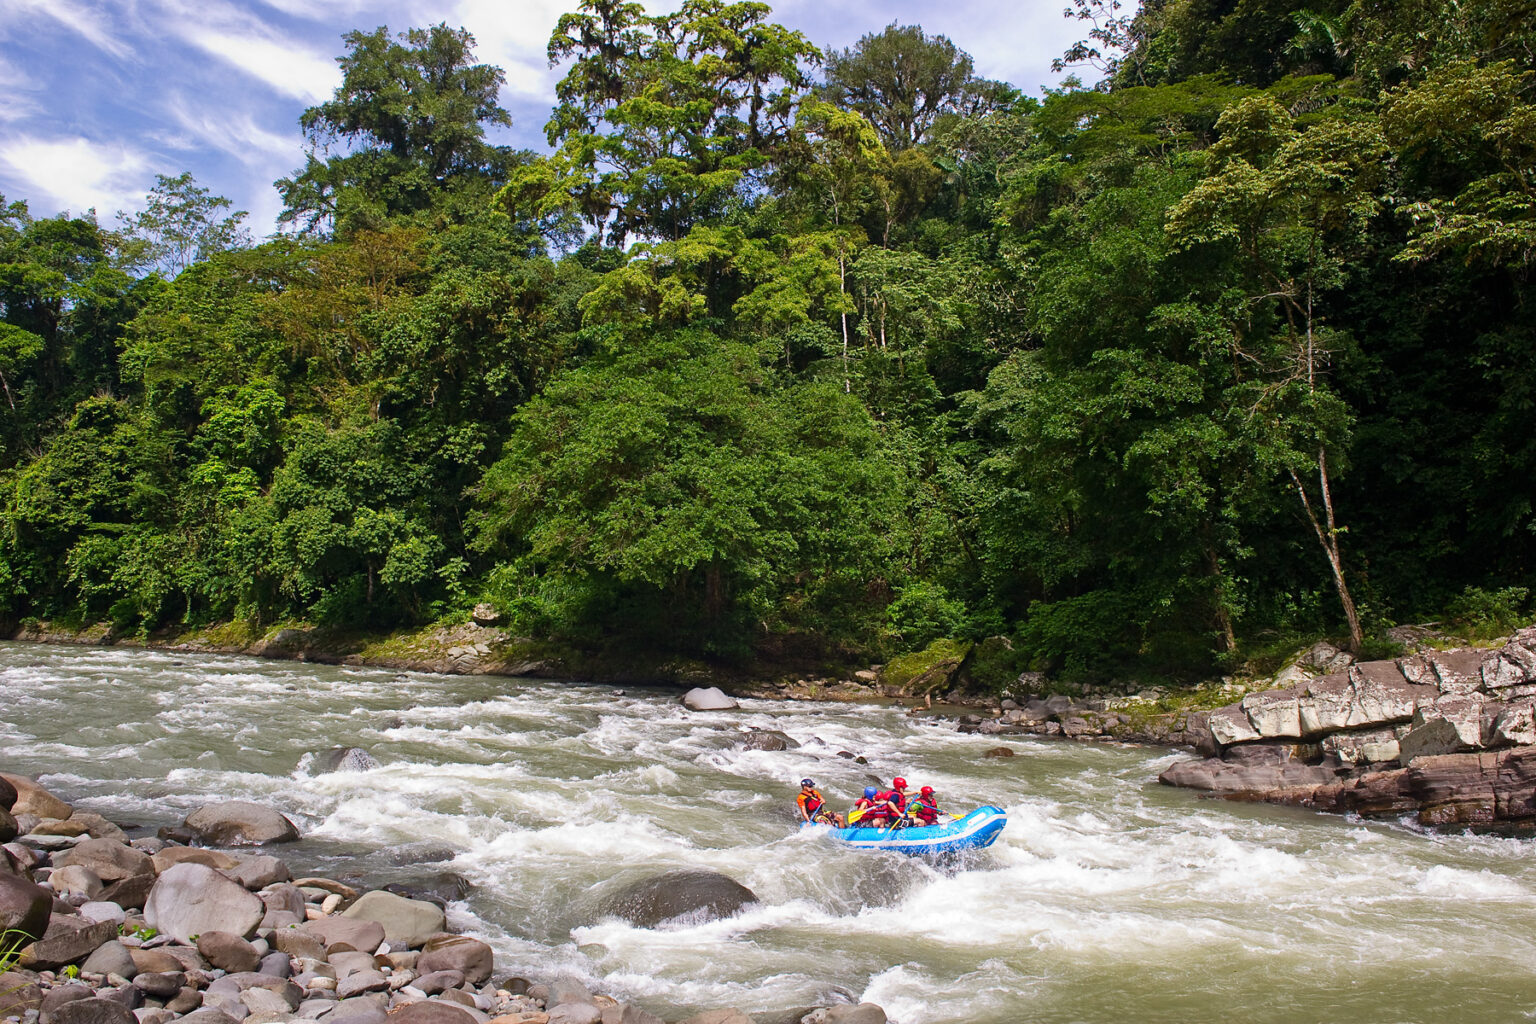 A paddle raft going through rapids surrounded by lush rainforest on a Costa Rica Pura Vida trip